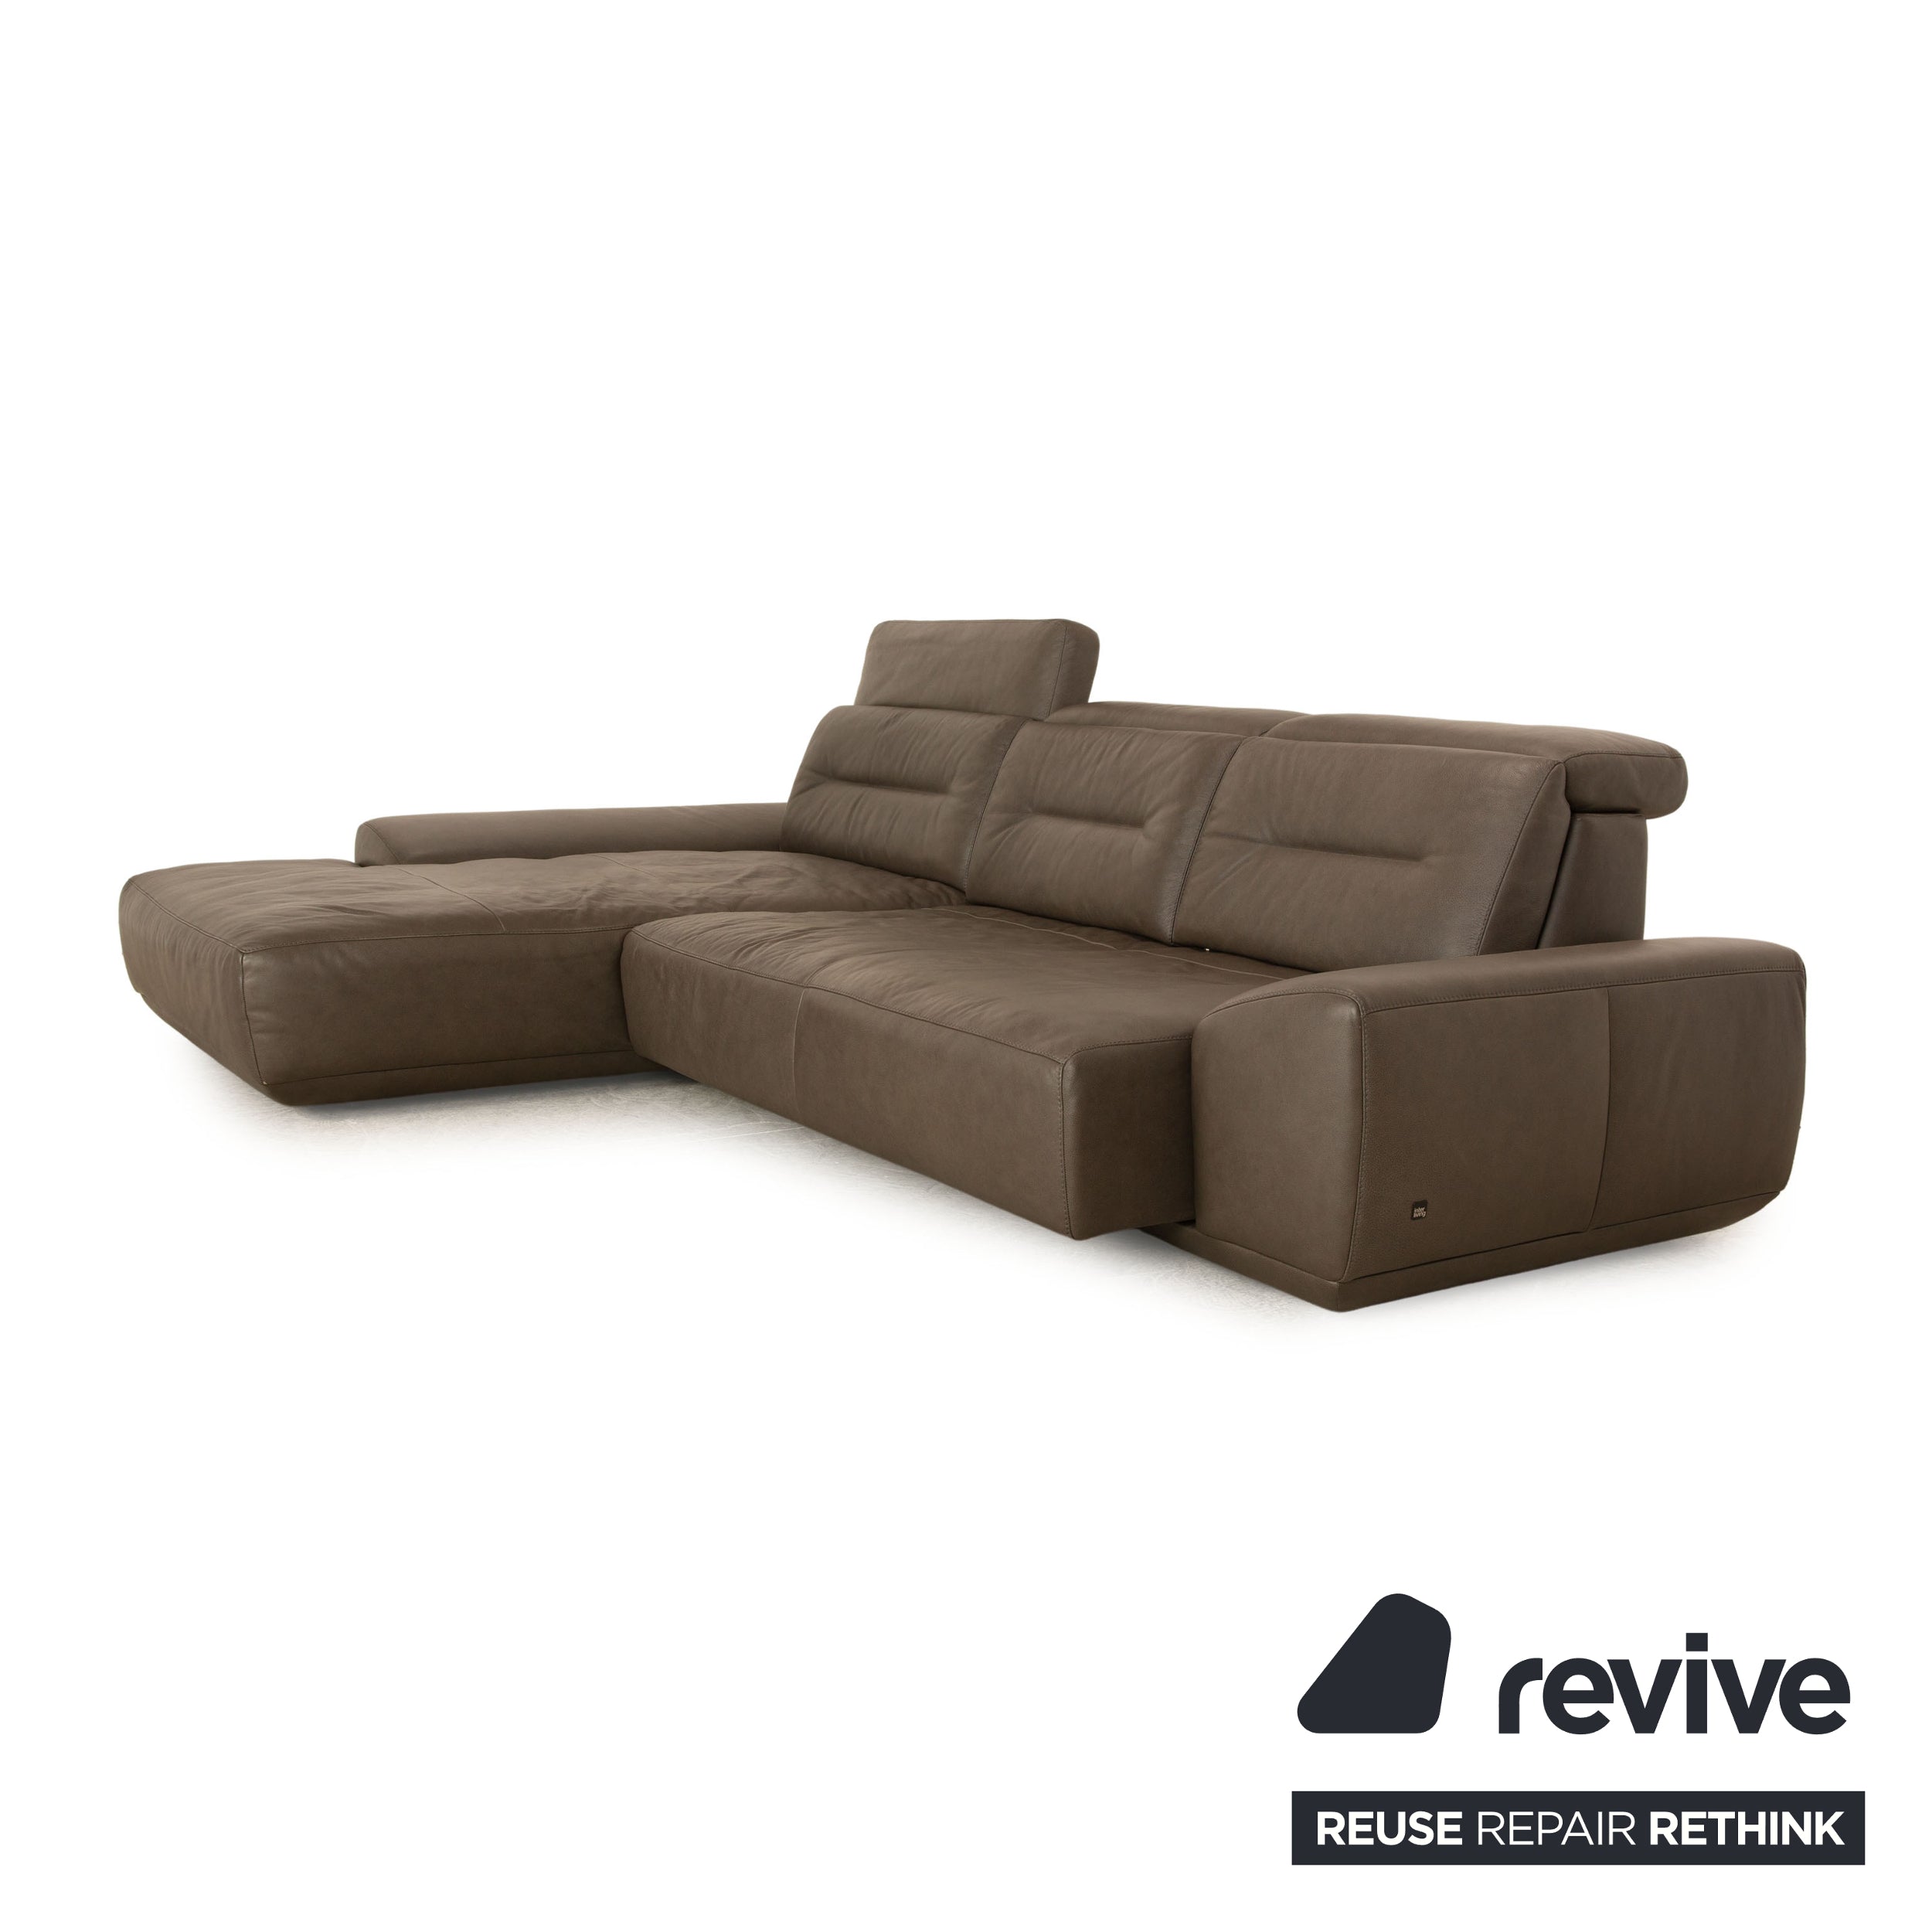 Willi Schillig Leather Corner Sofa Brown Electric Function Recamiere Left Sofa Couch for Interliving